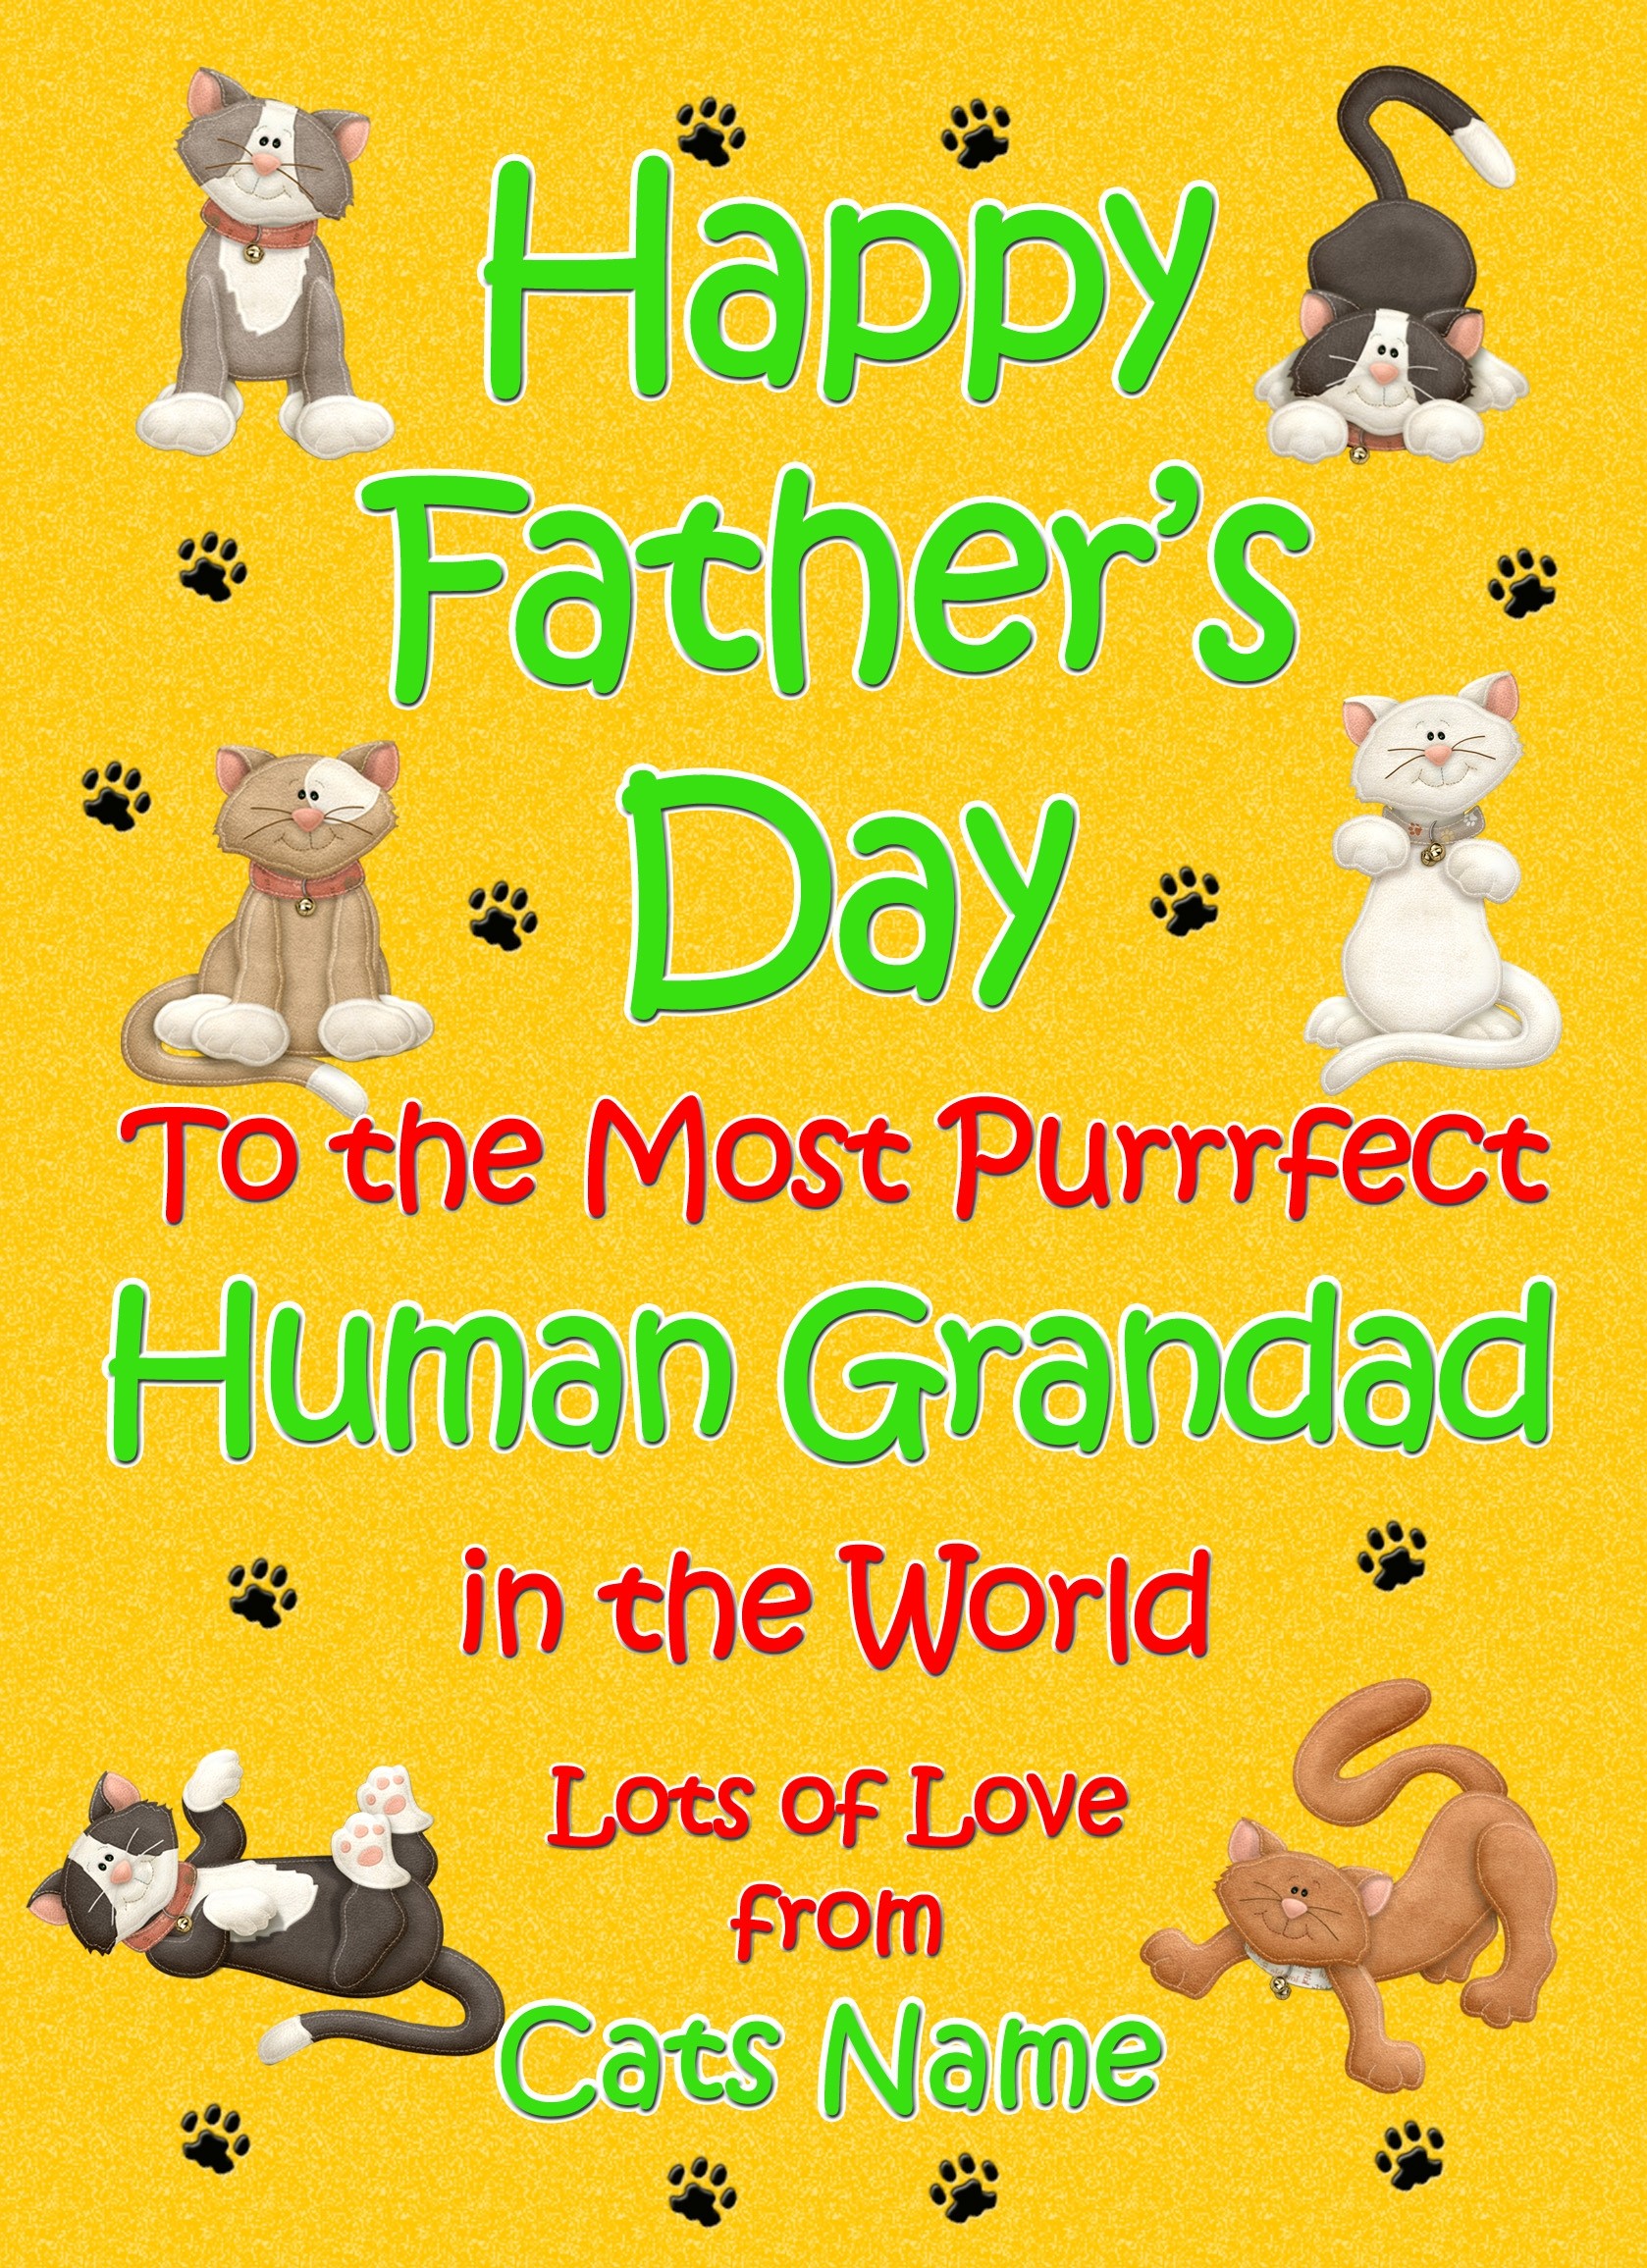 Personalised From The Cat Fathers Day Card (Yellow, Purrrfect Human Grandad)